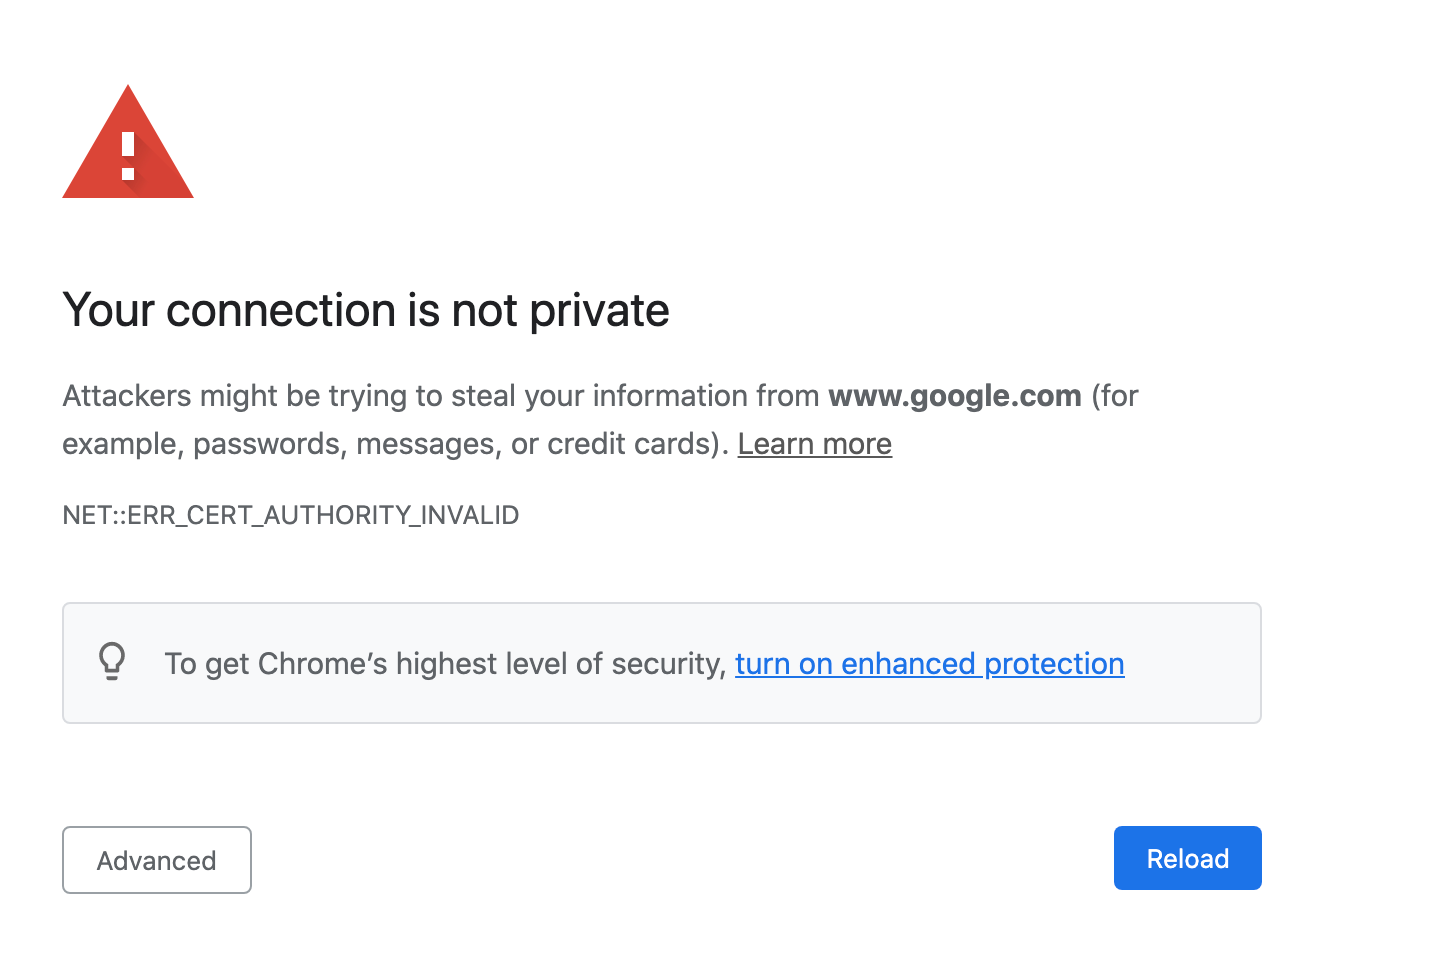 Chrome does not recognize the certificate